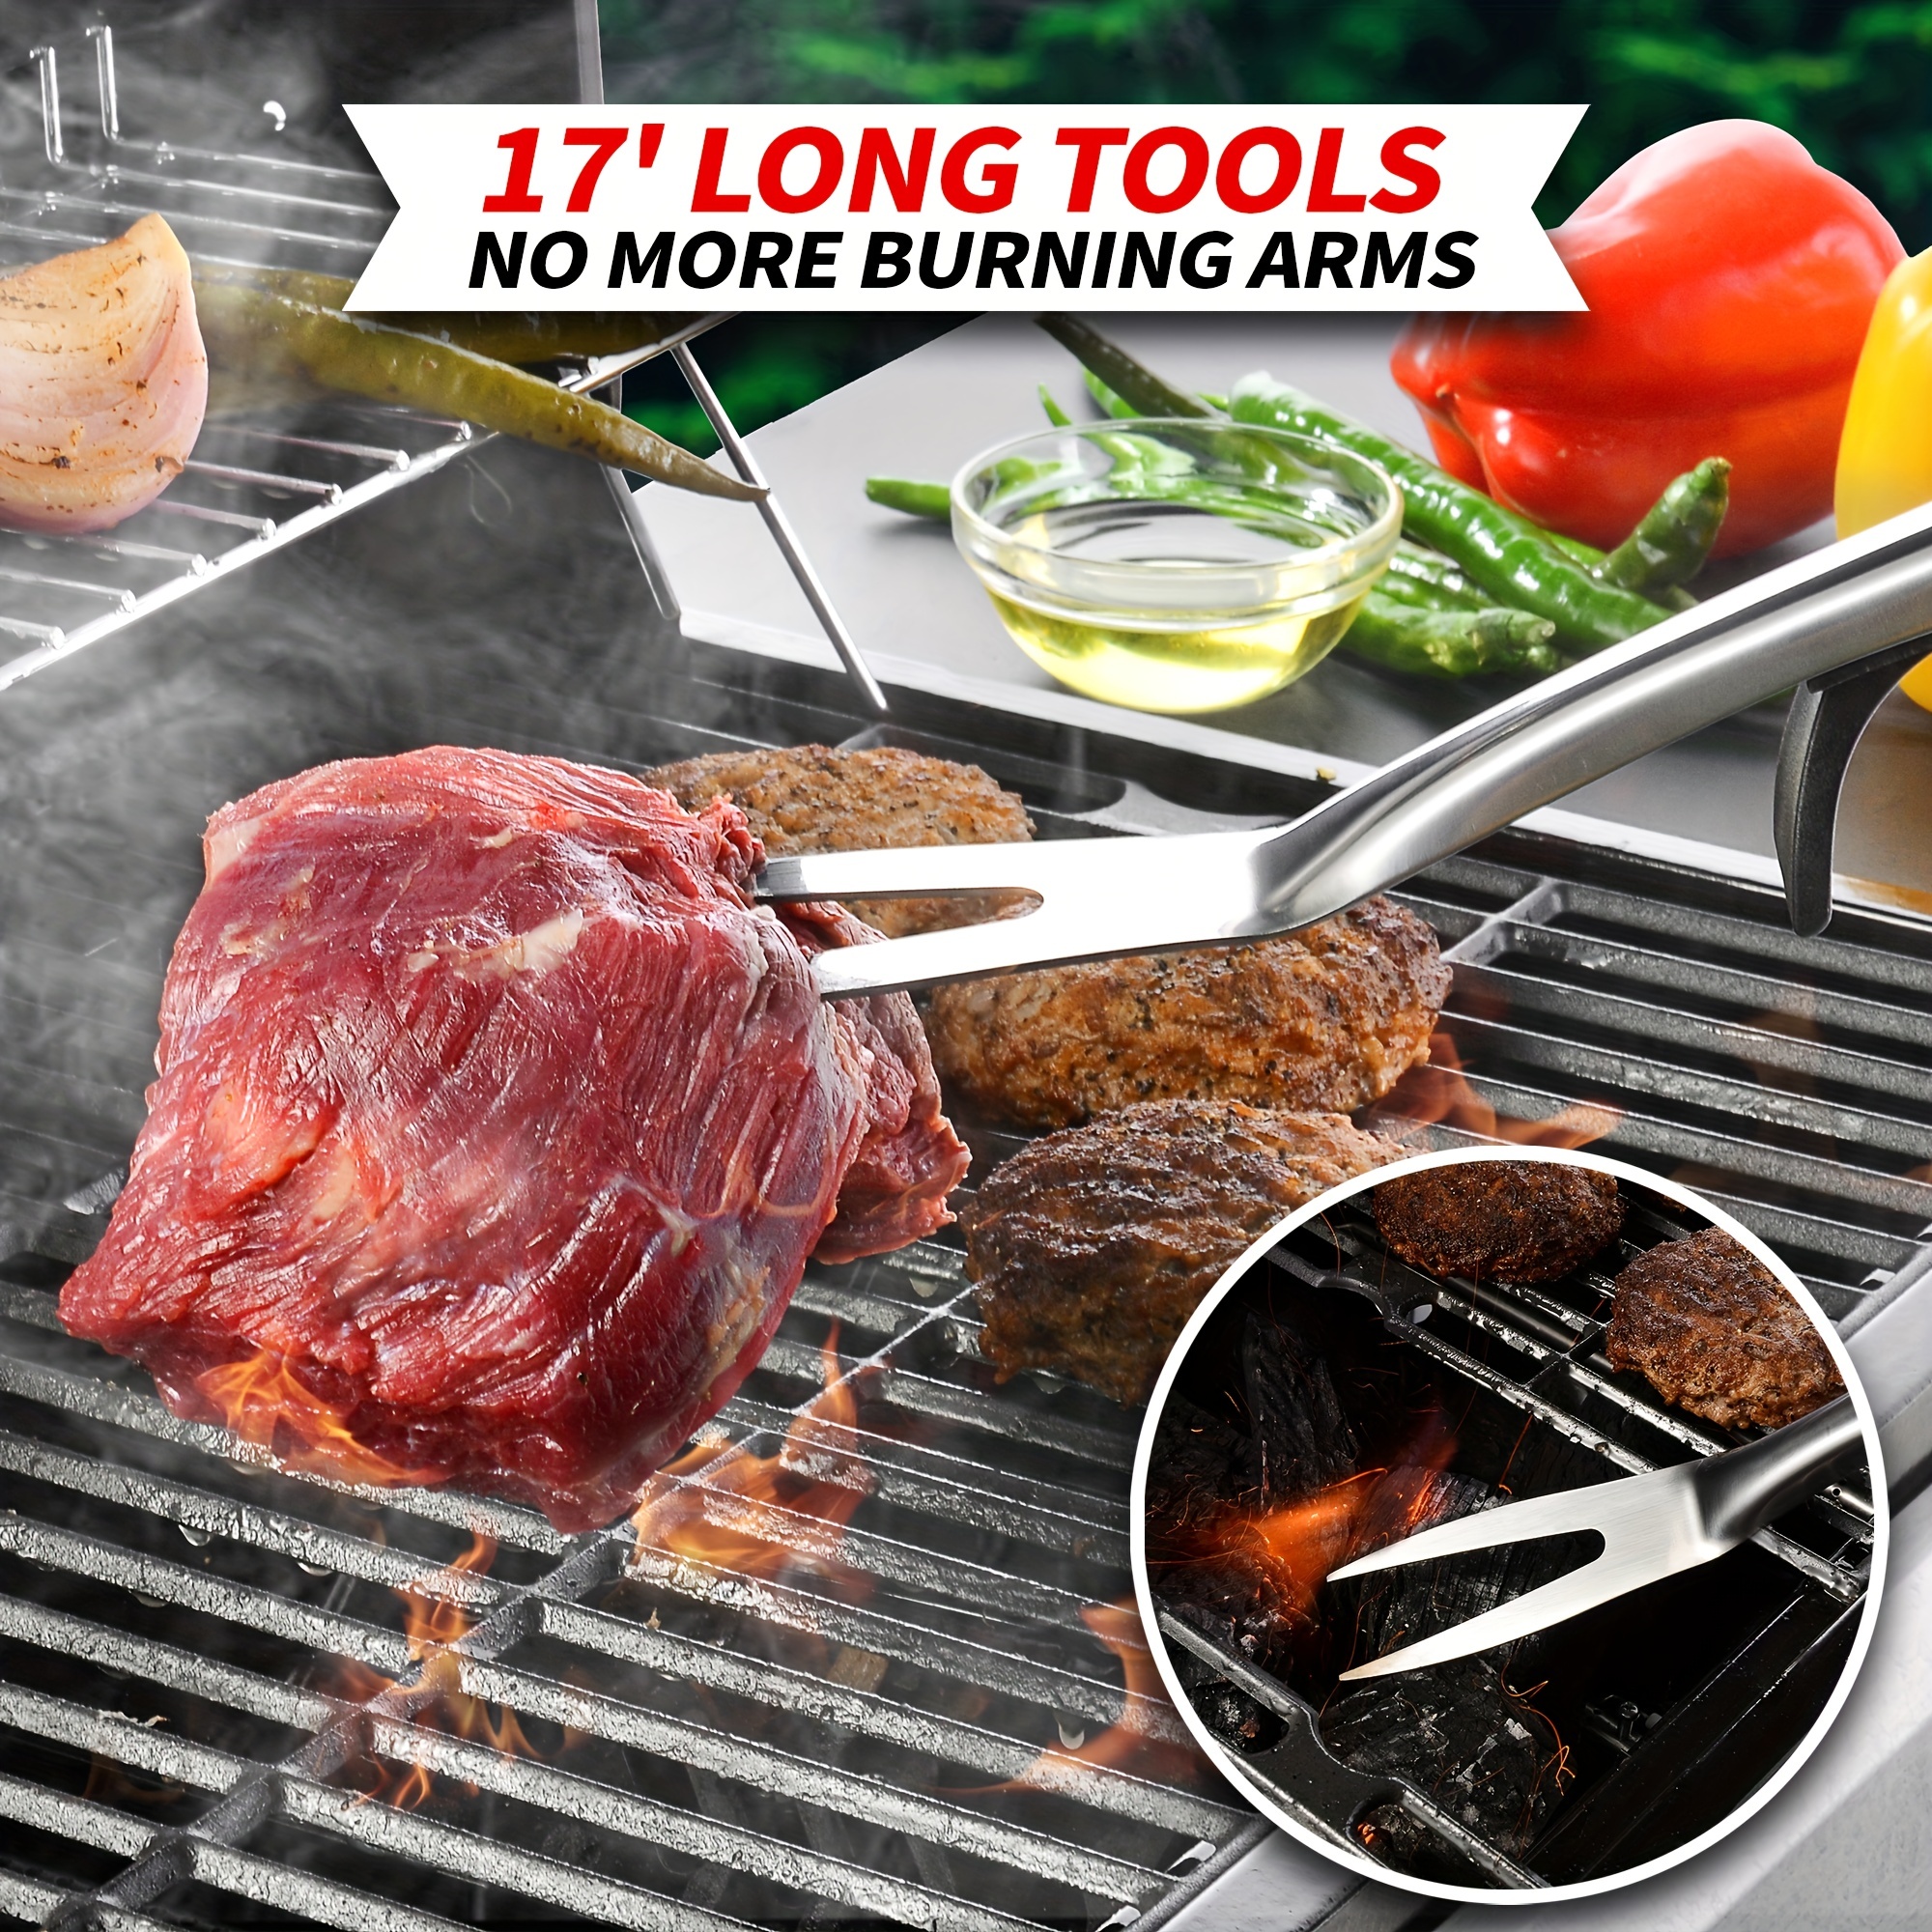 BBQ Grilling - Best BBQ Grill Tools and Accessories for BBQ Grilling